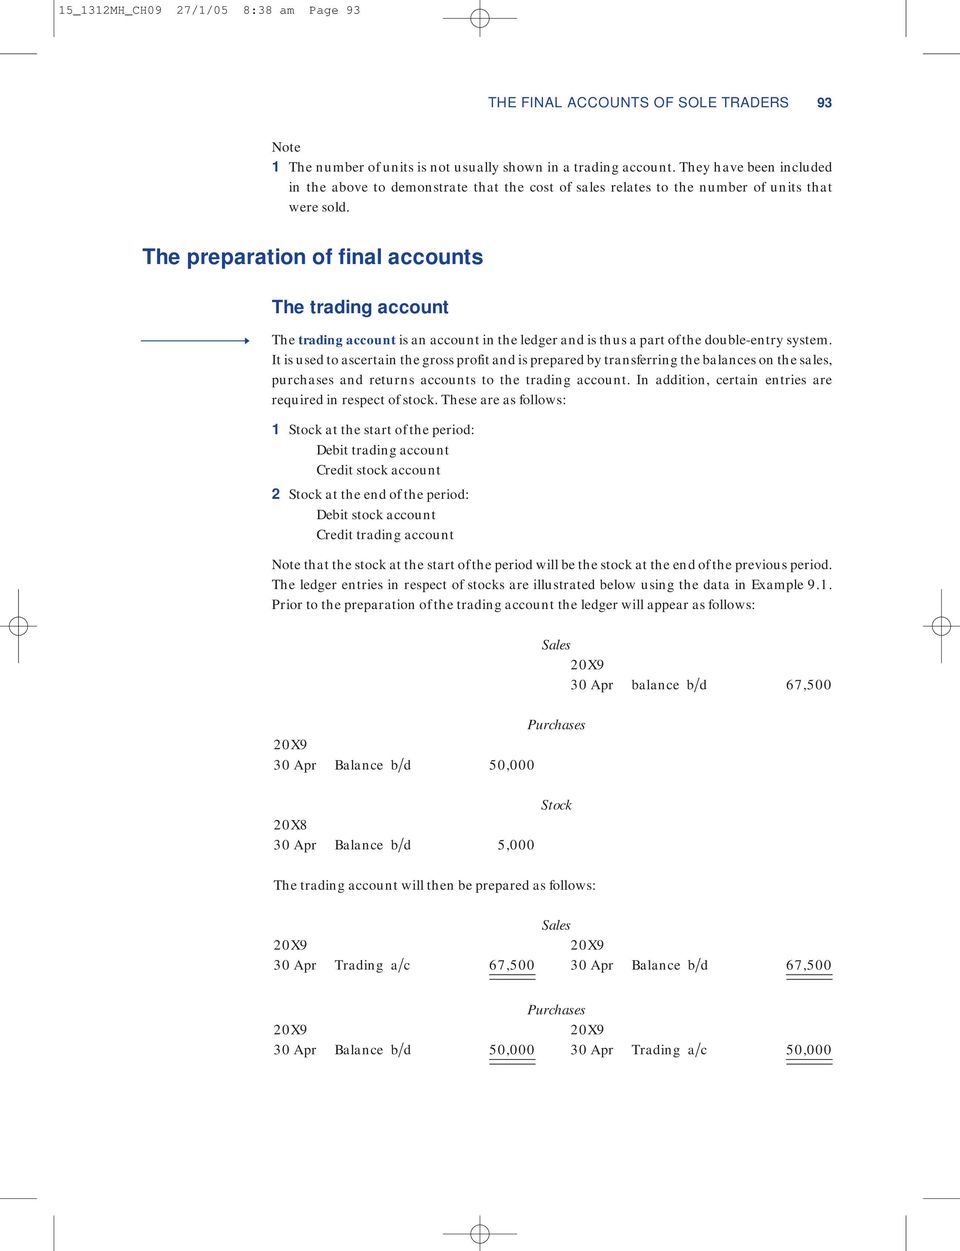 The preparation of final accounts The trading account The trading account is an account in the ledger and is thus a part of the double-entry system.